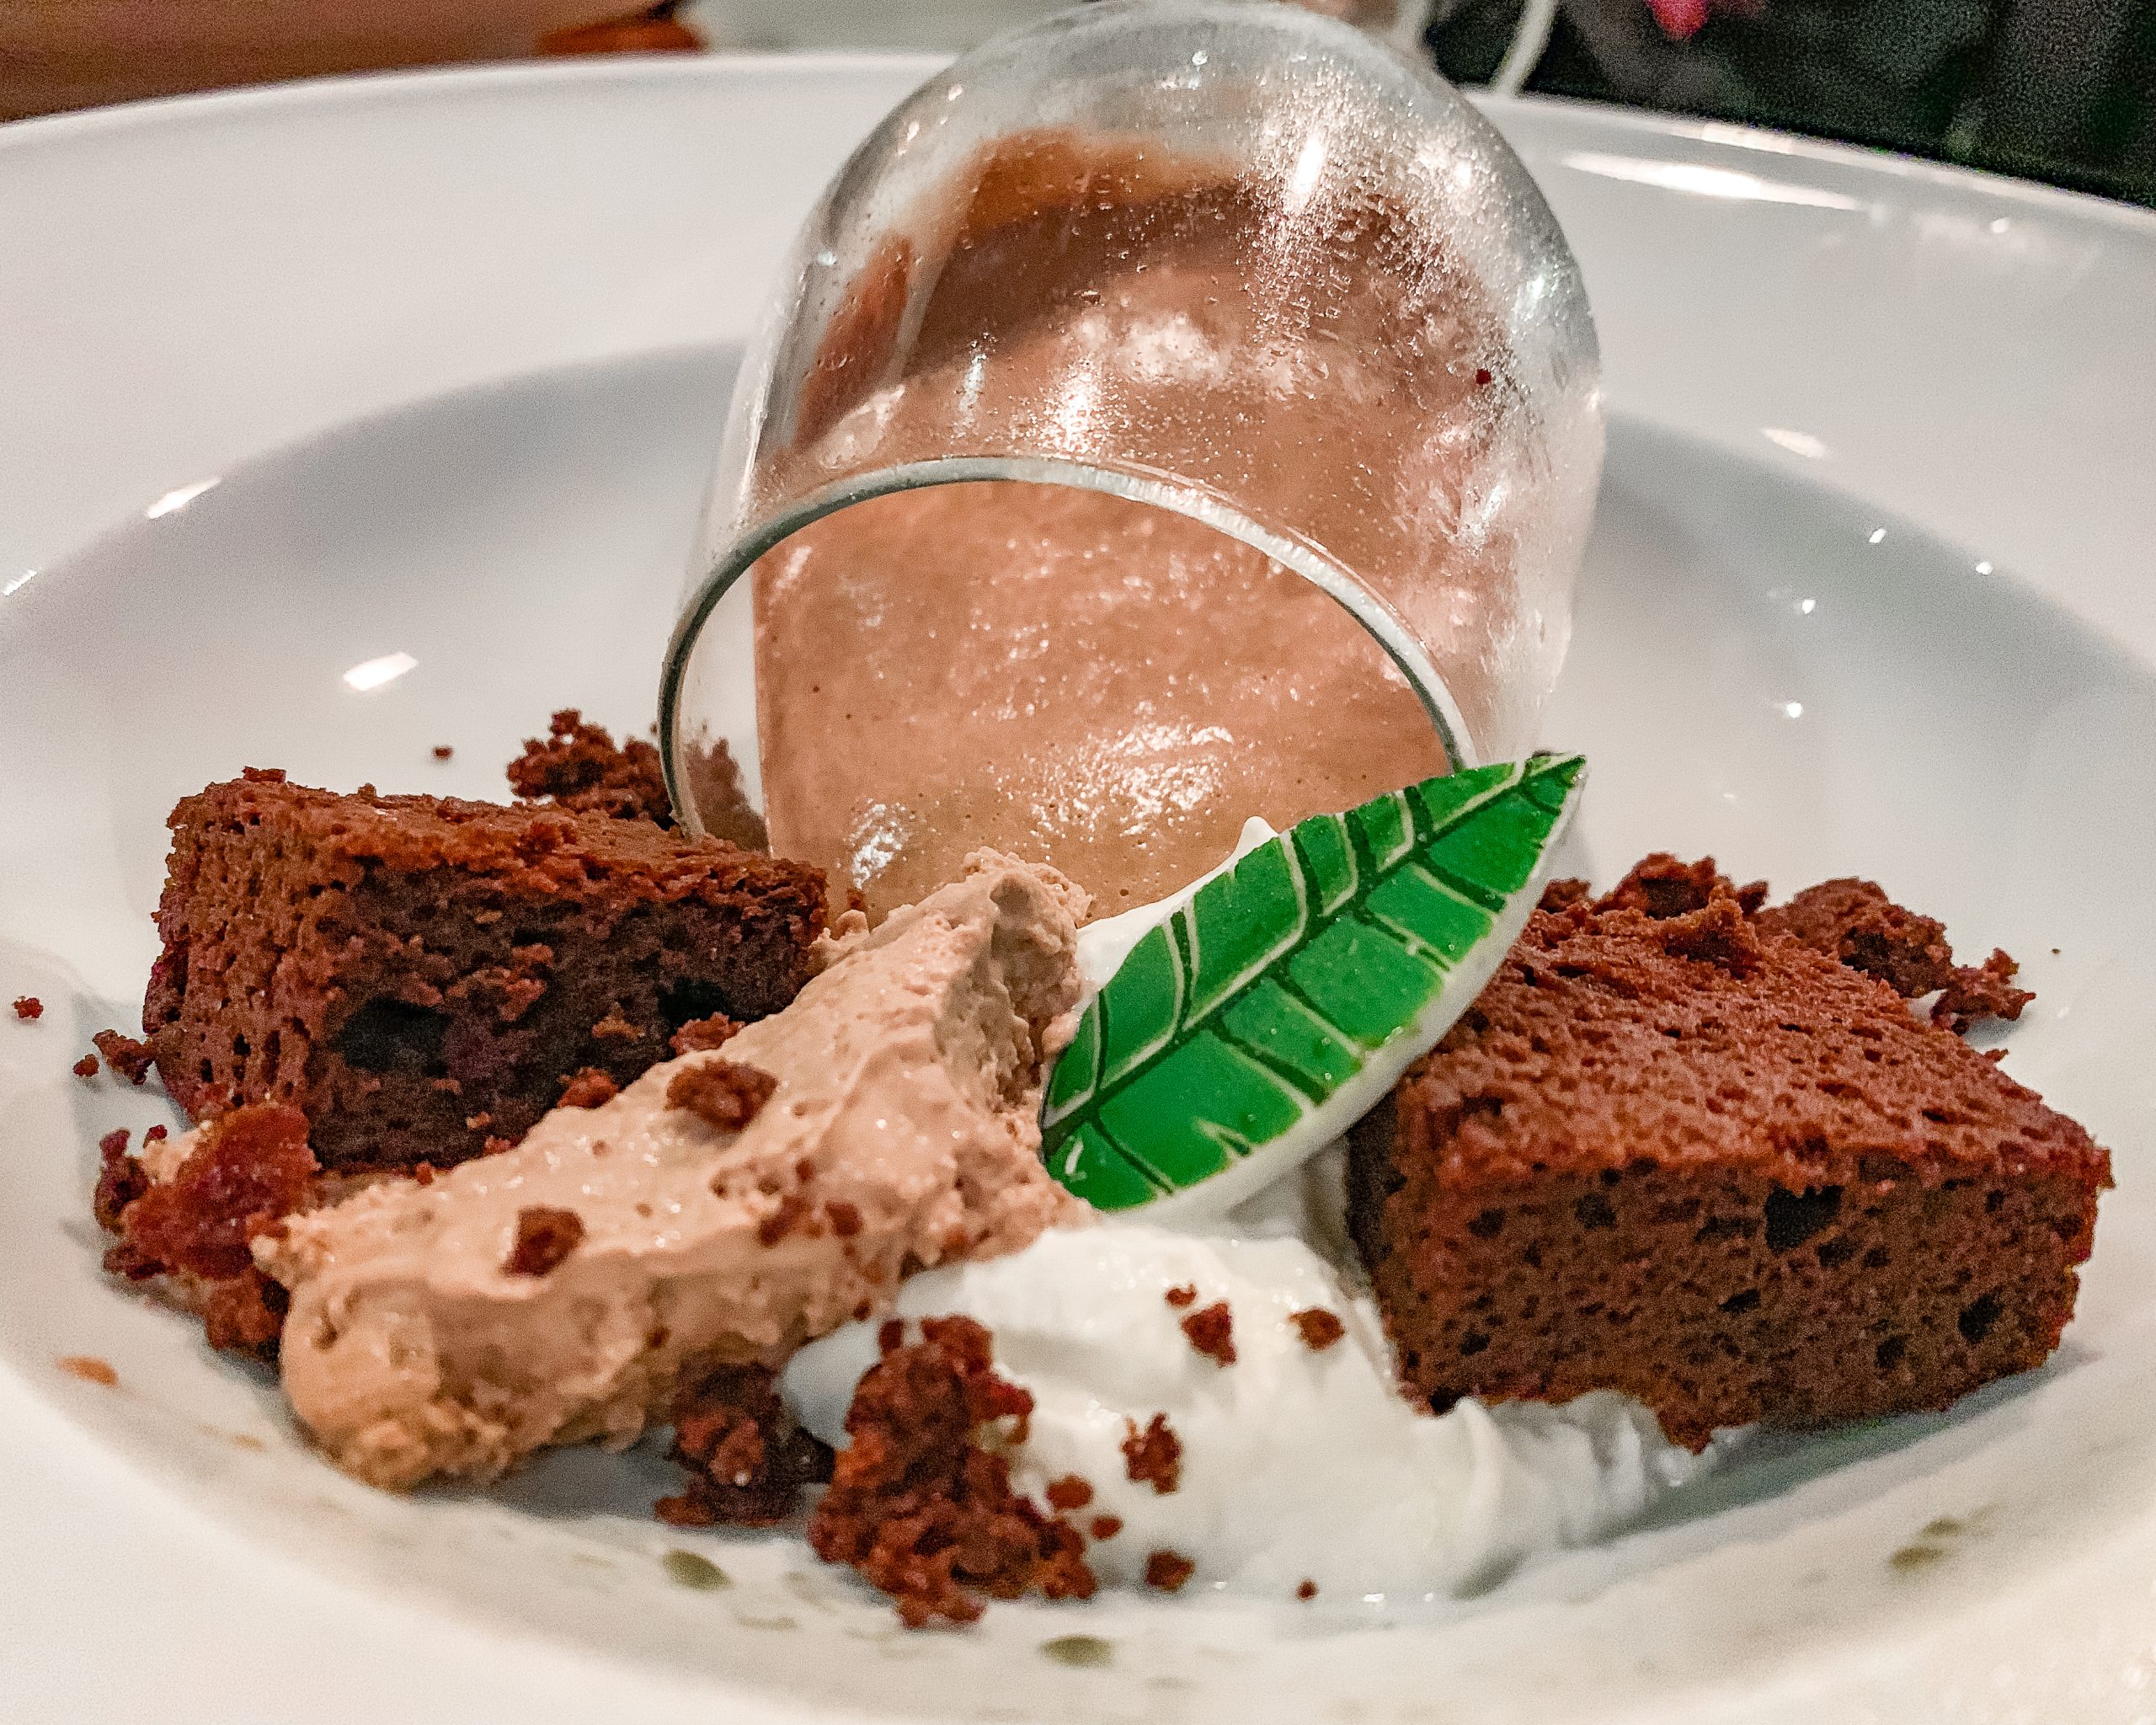 Cigar-Smoked chocolate Mousse Cake with dark chocolate basil semifreddo served in a wine glass.